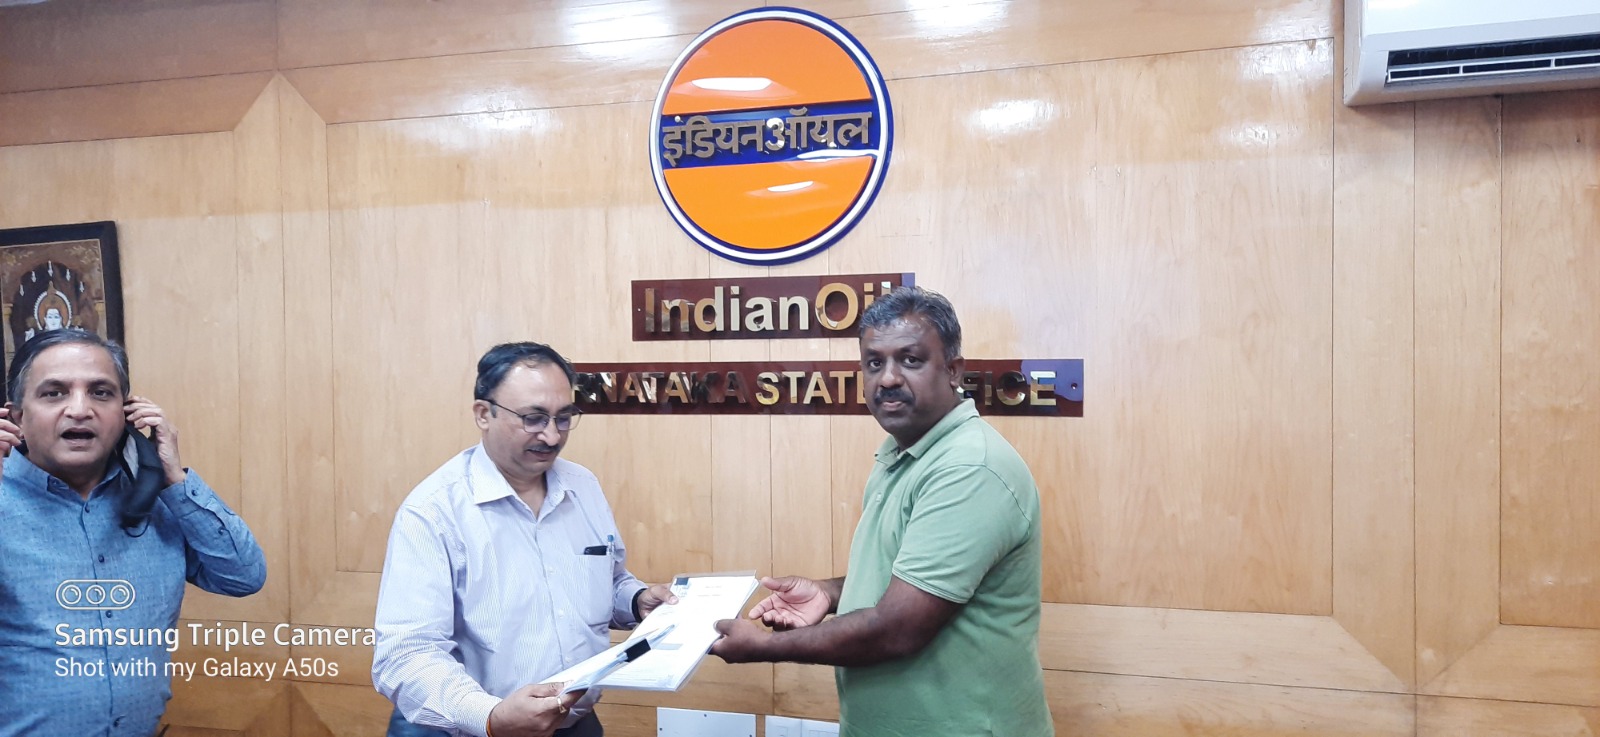 Supply contract signature with Indian Oil Corporation, govt of india